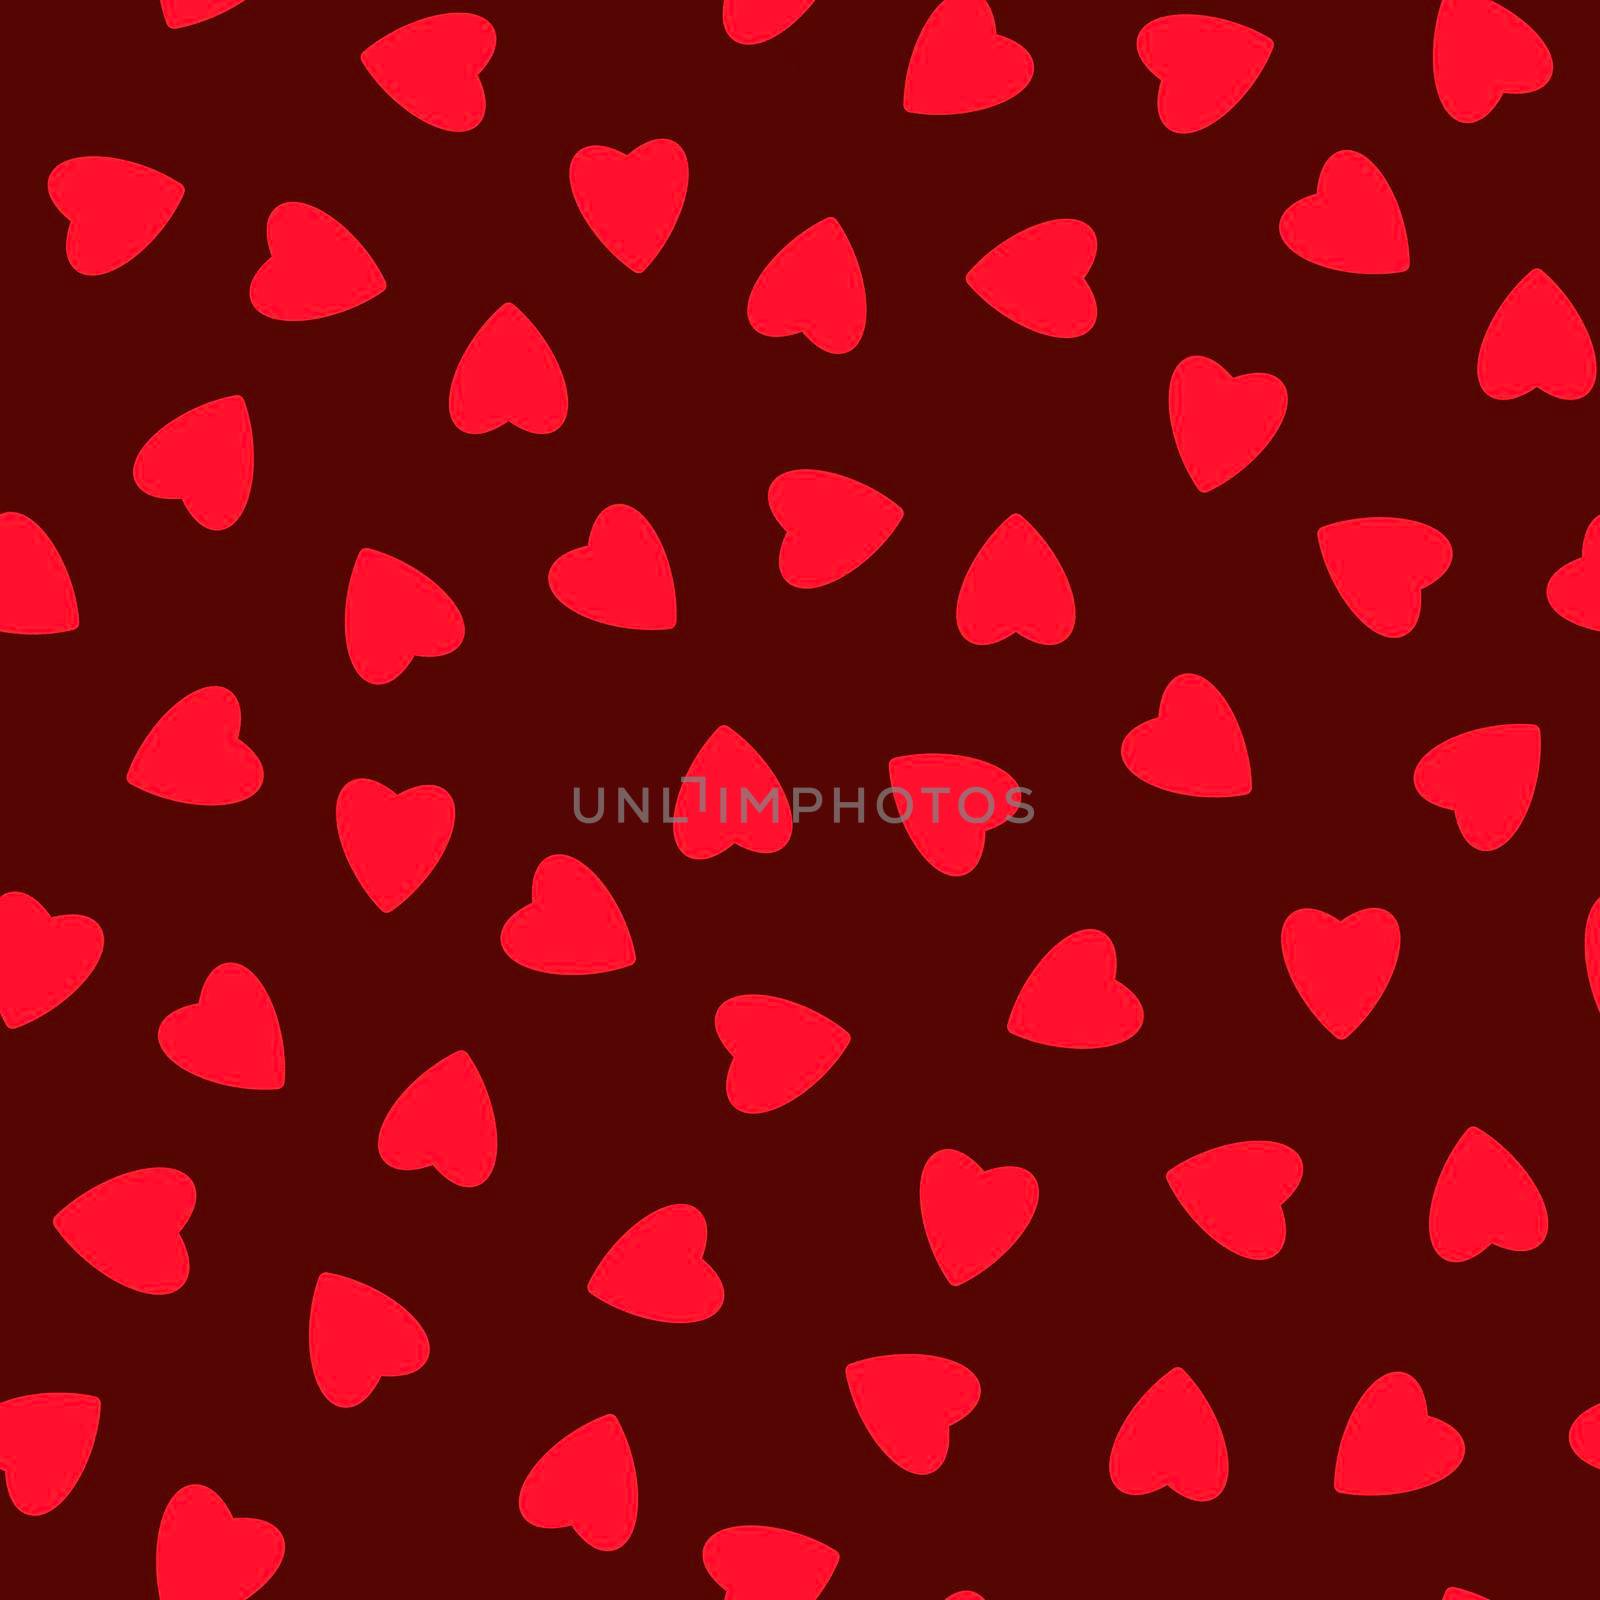 Simple hearts seamless pattern,endless chaotic texture made of tiny heart silhouettes.Valentines,mothers day background.Great for Easter,wedding,scrapbook,gift wrapping paper,textiles.Red on burundy.